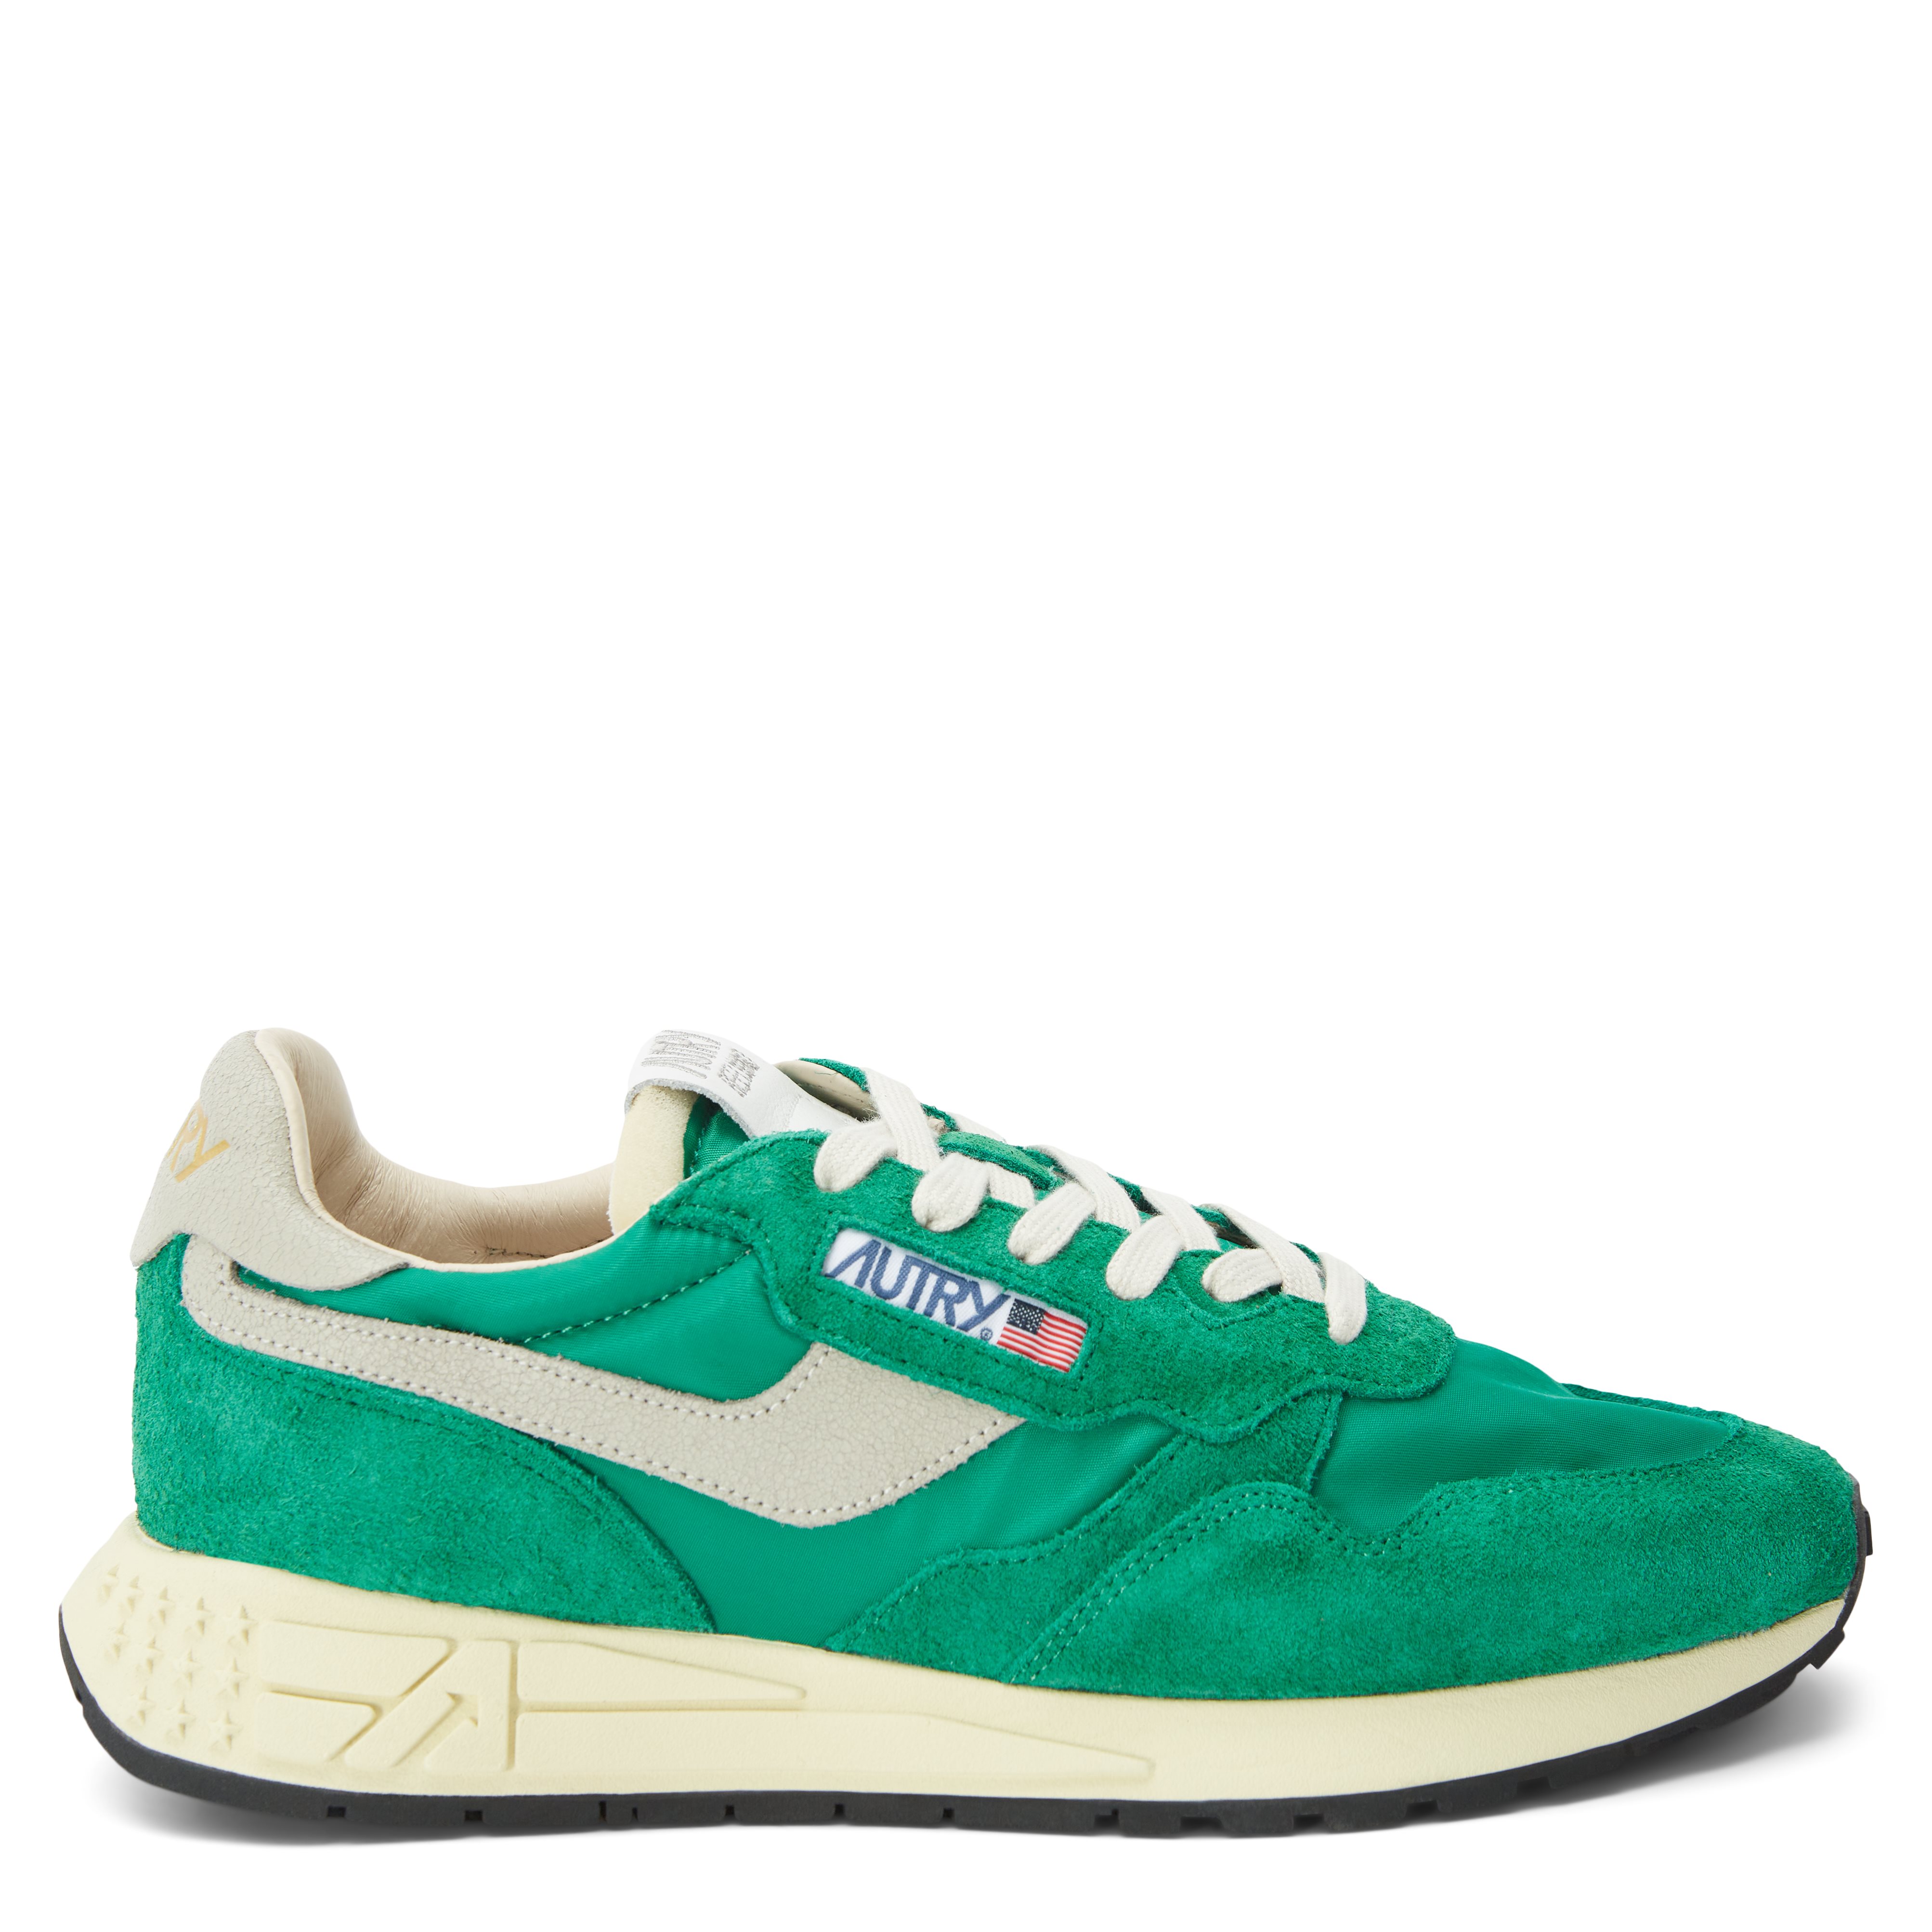 AUTRY Shoes WWLM NC03 Green